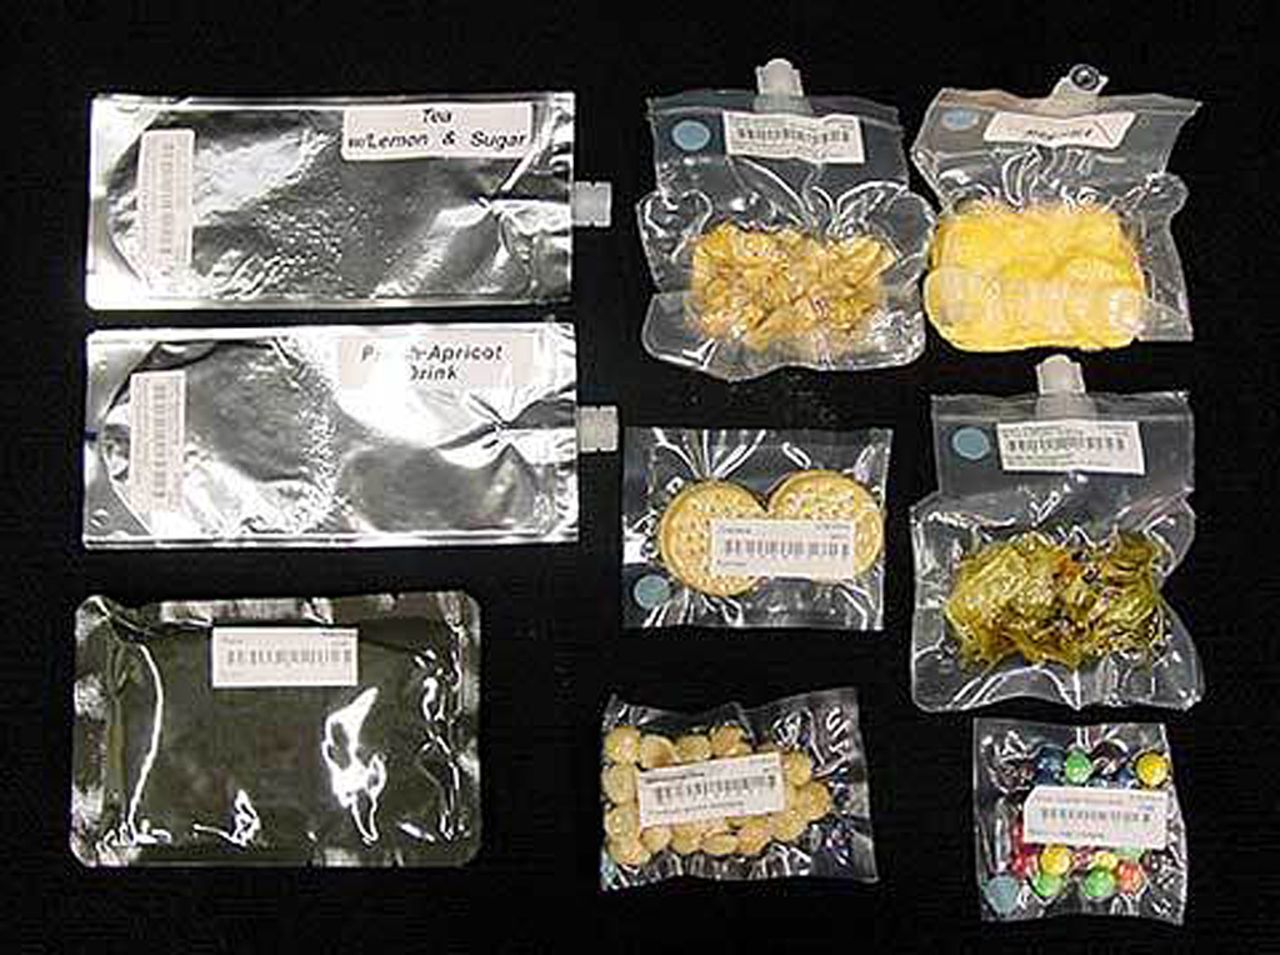 Space rations are generally contained in sealed bags. To drink liquids, astronauts suck directly from the bag.